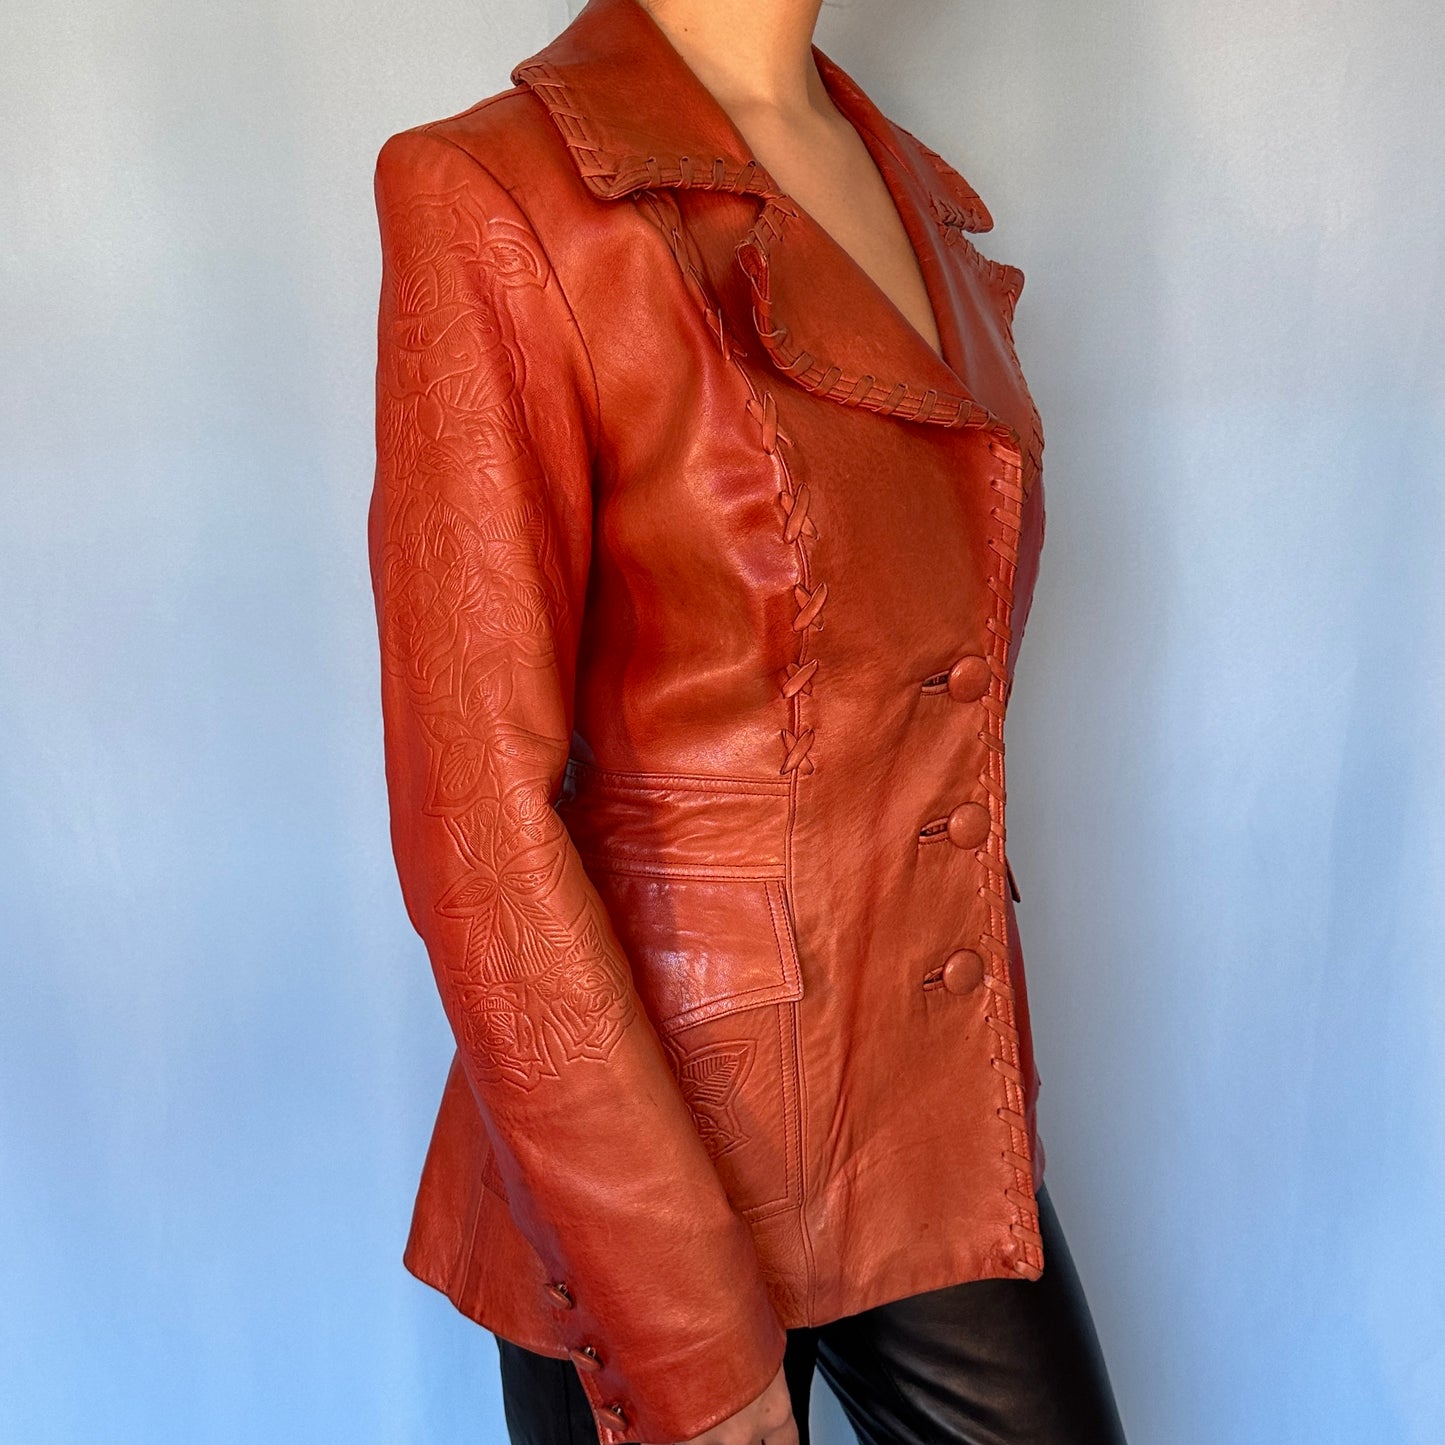 Anna Sui Burgundy Rose Embossed Leather Jacket